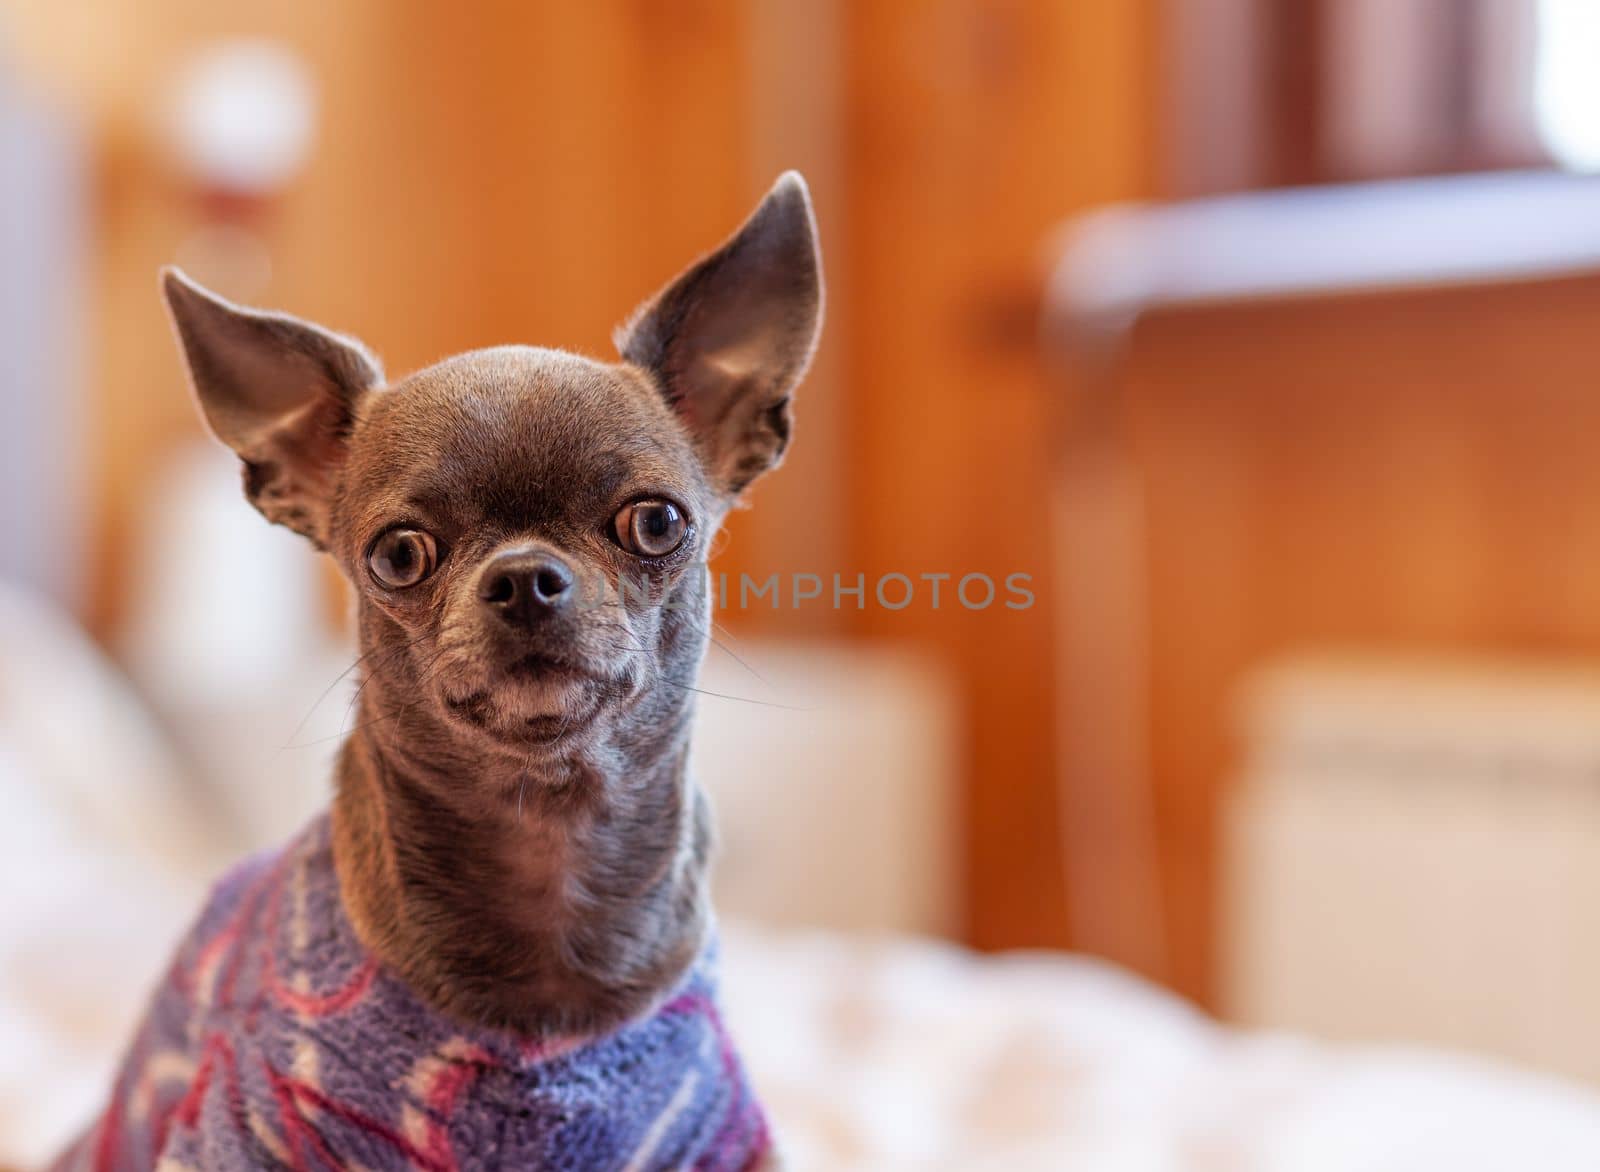 A close-up image shows a cute chihuahua puppy of a domestic mammal breed lying relaxing on a bed. Pets are resting, sleeping. A touching and emotional portrait. Dog ears, eyes and muzzles